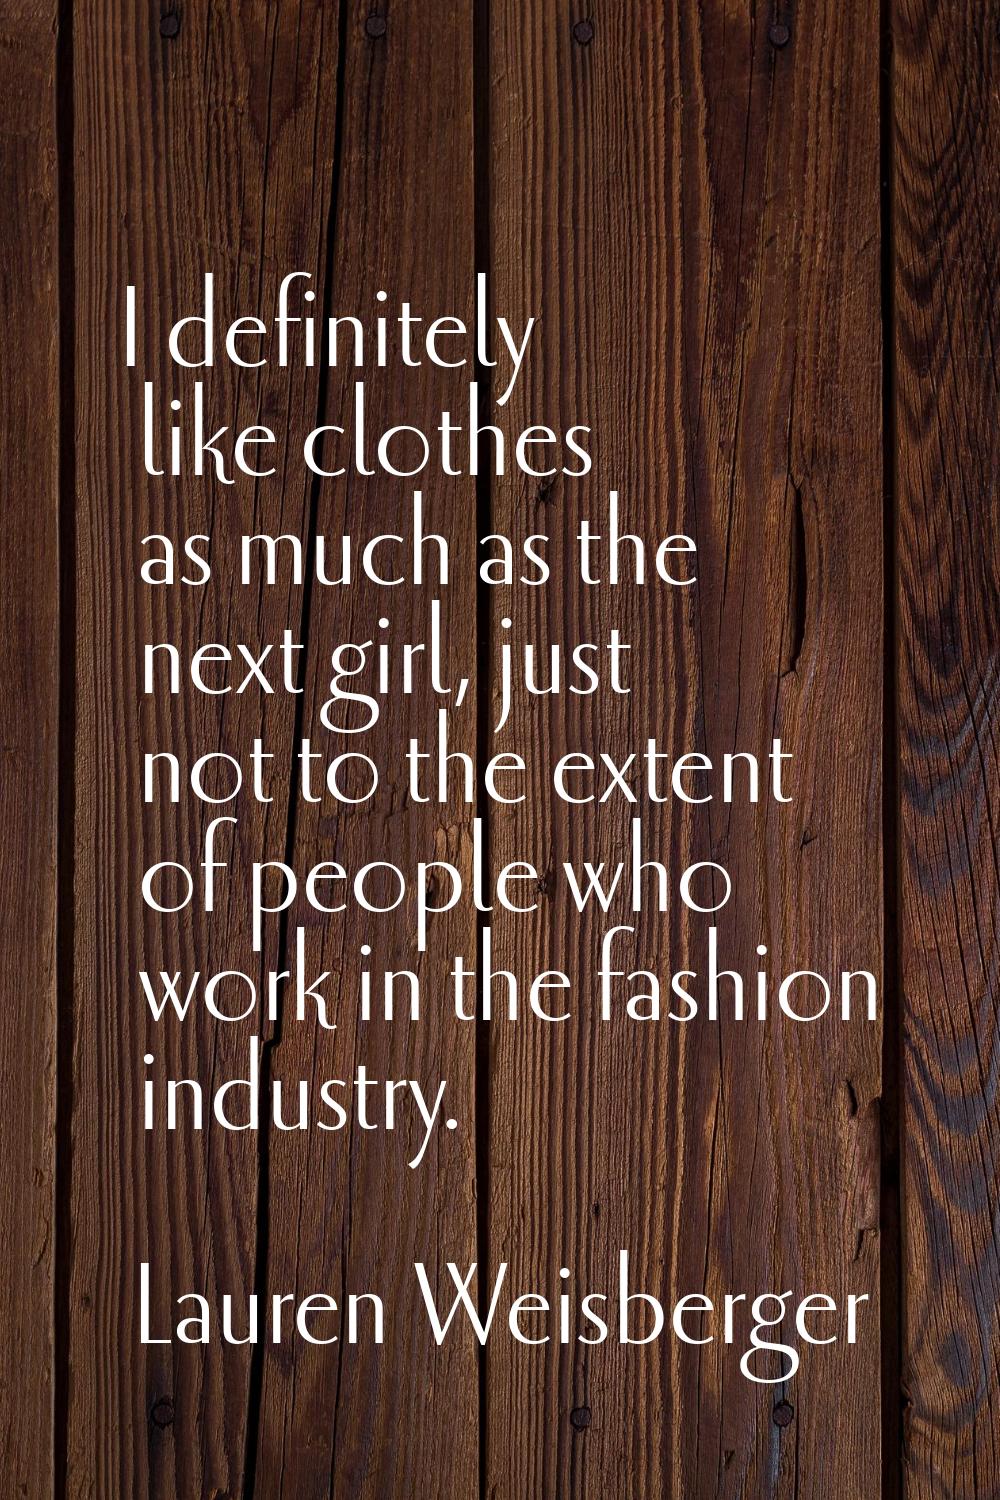 I definitely like clothes as much as the next girl, just not to the extent of people who work in th